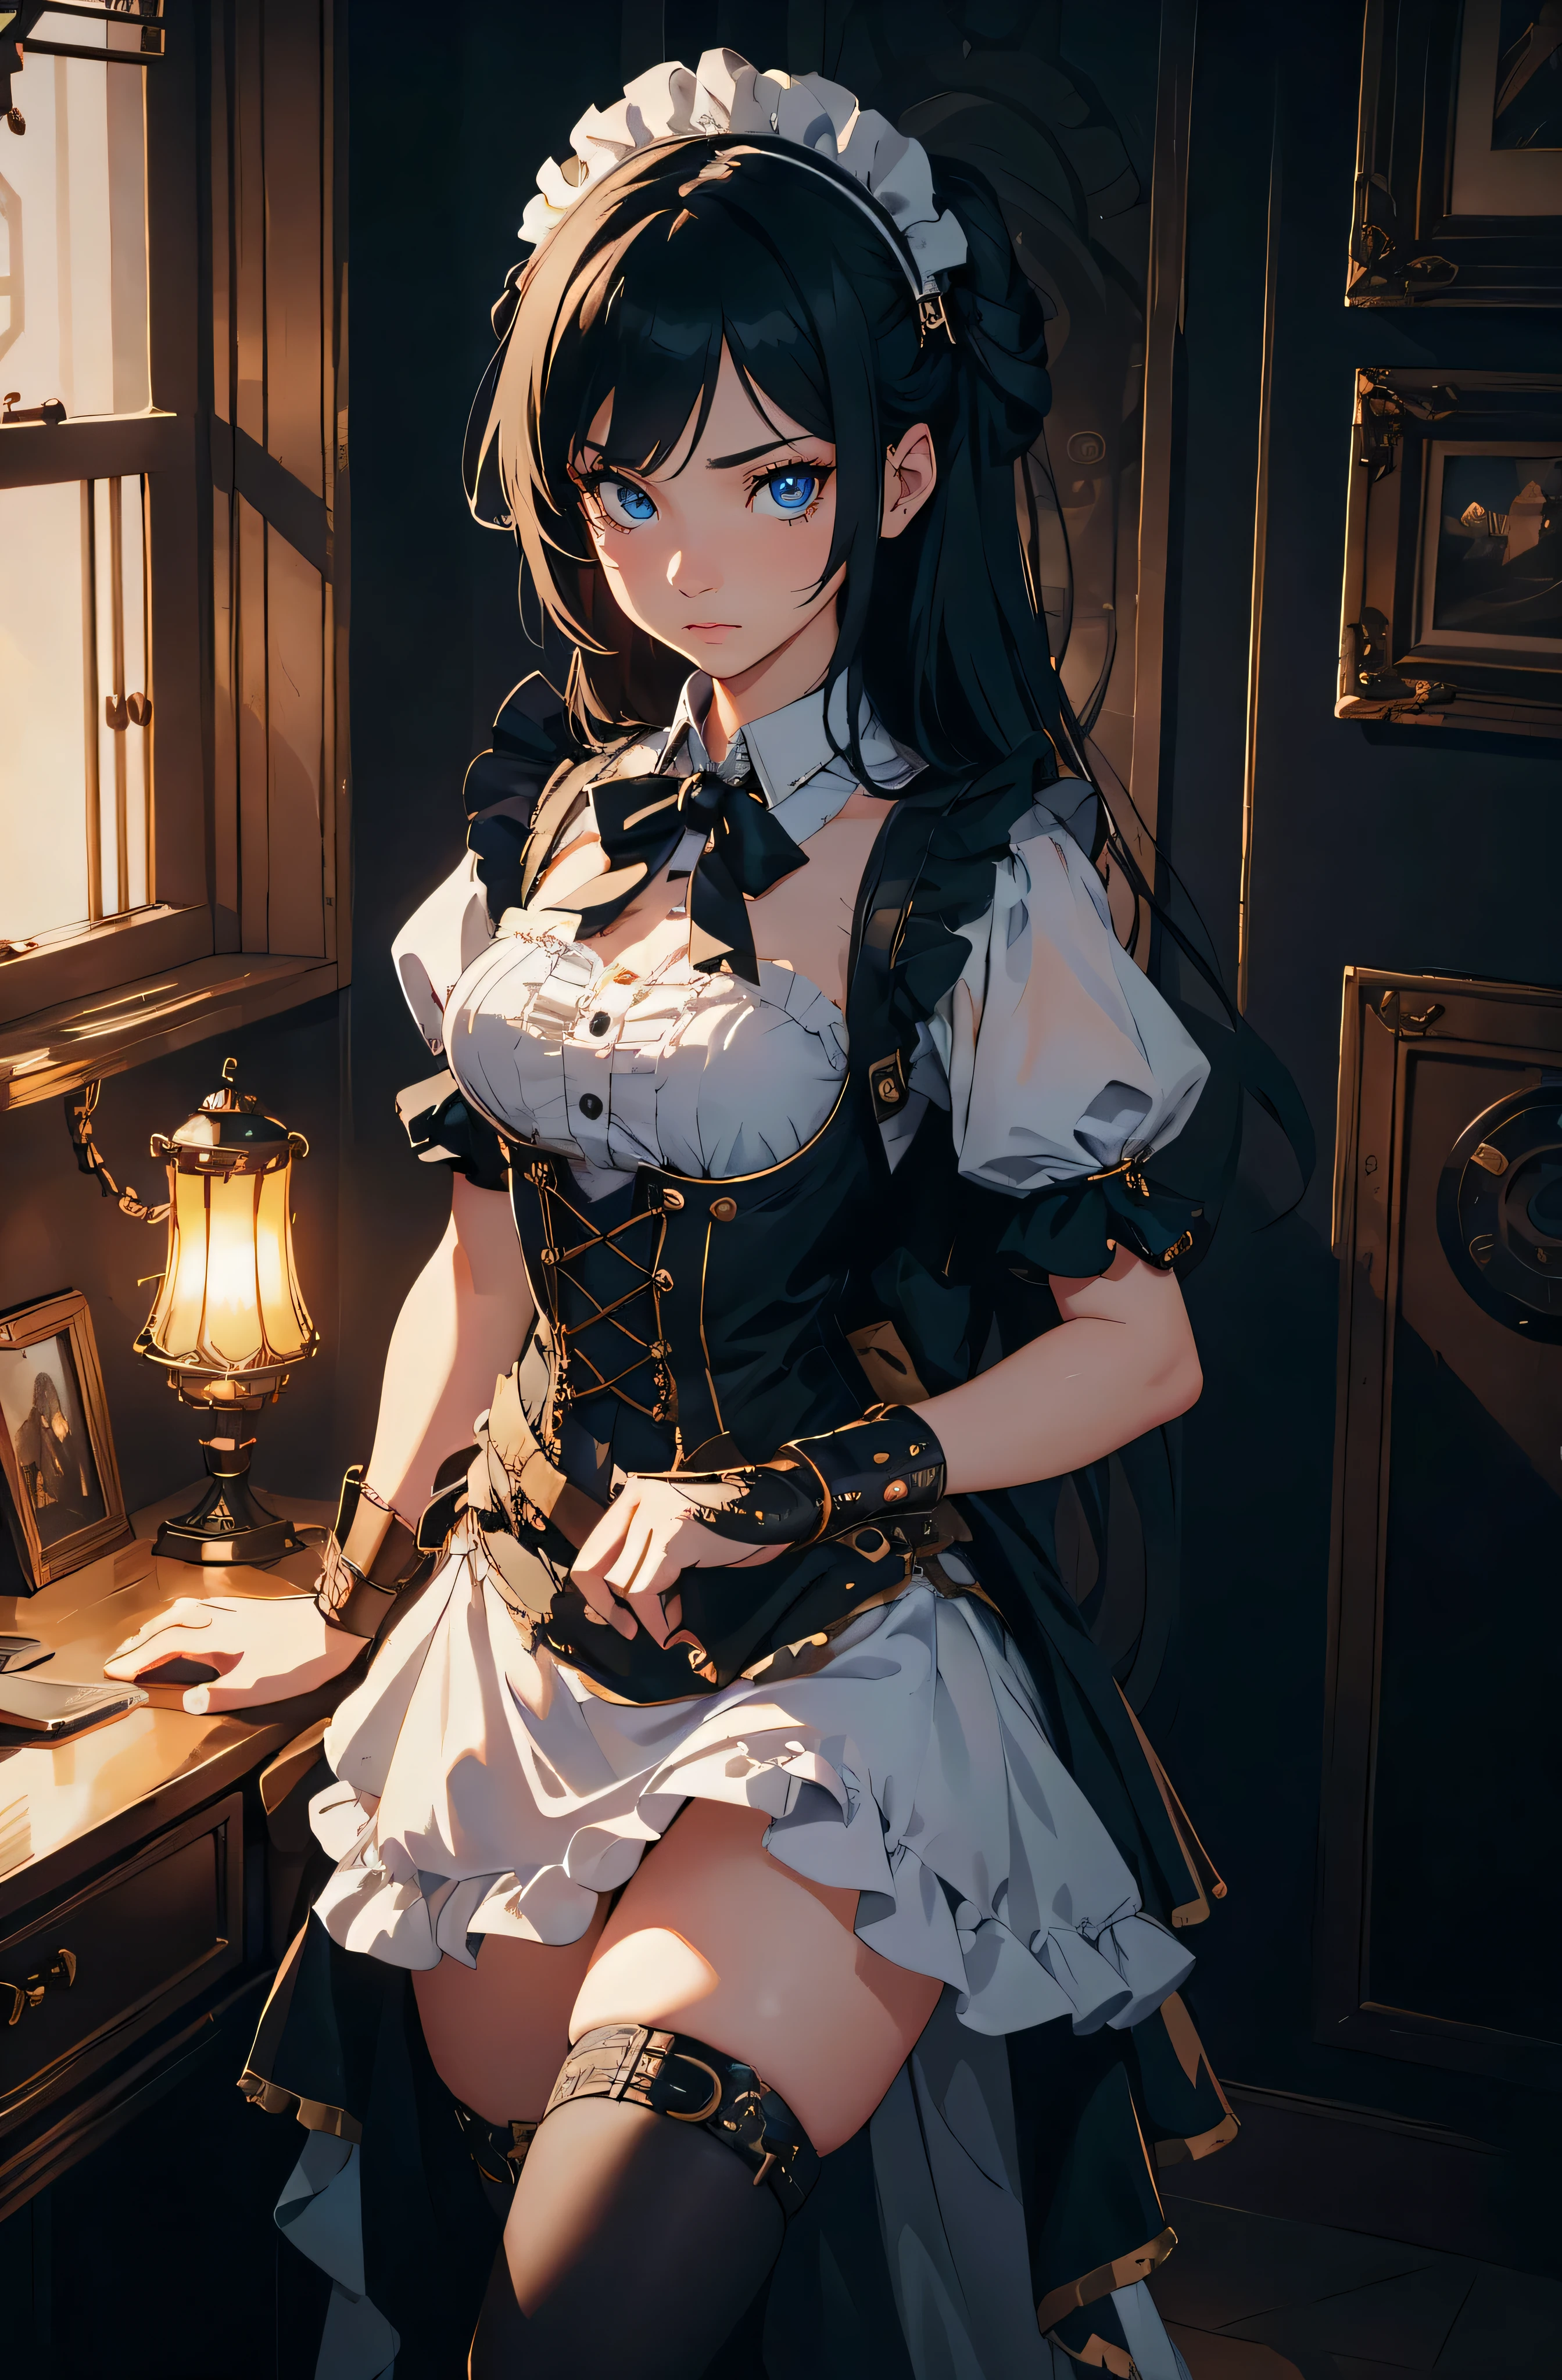 (tmasterpiece, high resolution,ultra - detailed:1.0),1 girl,Young and beautiful woman,eye looking to camera,Perfect female body, (full body), (steampunk Castle), Extremely detailed CG,Unity 8k wallpaper，Complicated details, solo person, (blue eyes), asian eyes, (medium black hair,Maid clothes,short sleeves, timid expression),Luxurious bedroom,(steampunk style),Dark night,Portrait,color difference, Depth of field,dramatic shadow, Ray tracing, Best quality, Cinematic lighting,offcial art,